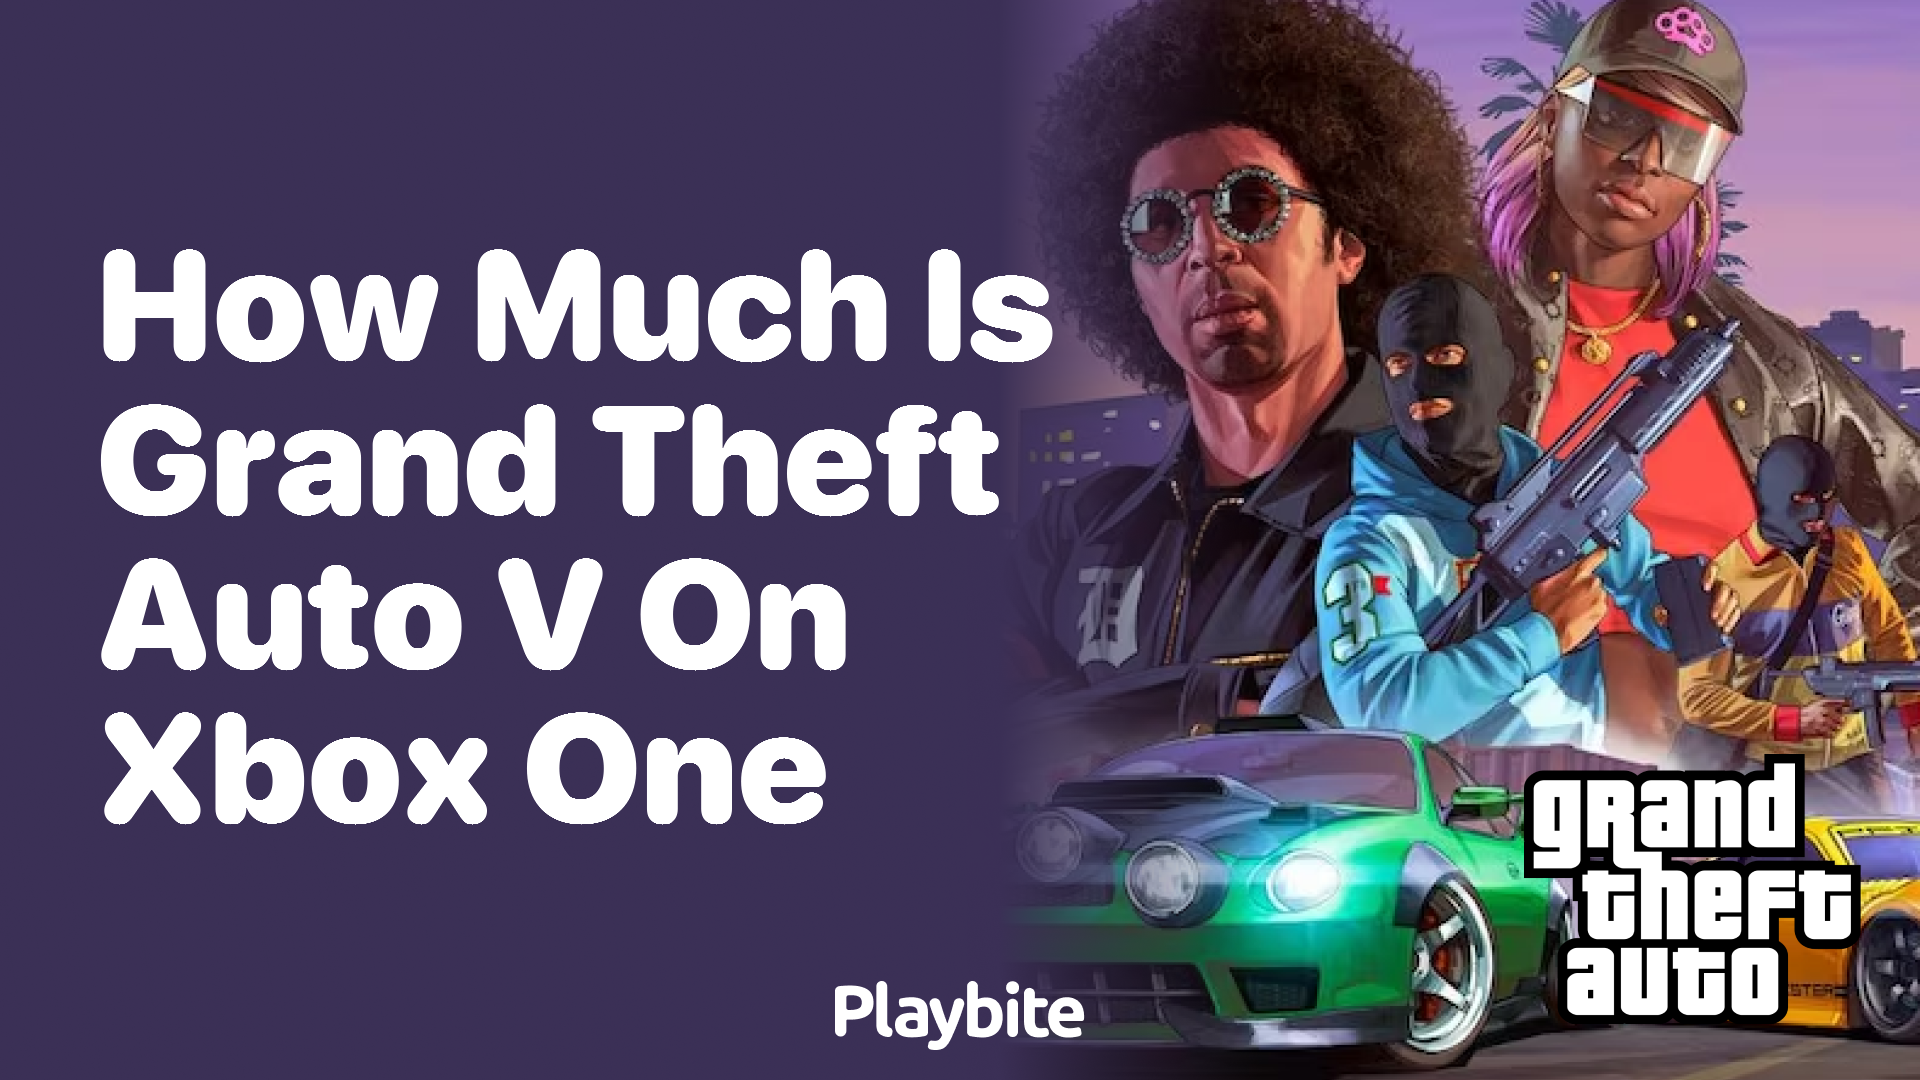 How much is Grand Theft Auto V on Xbox One?